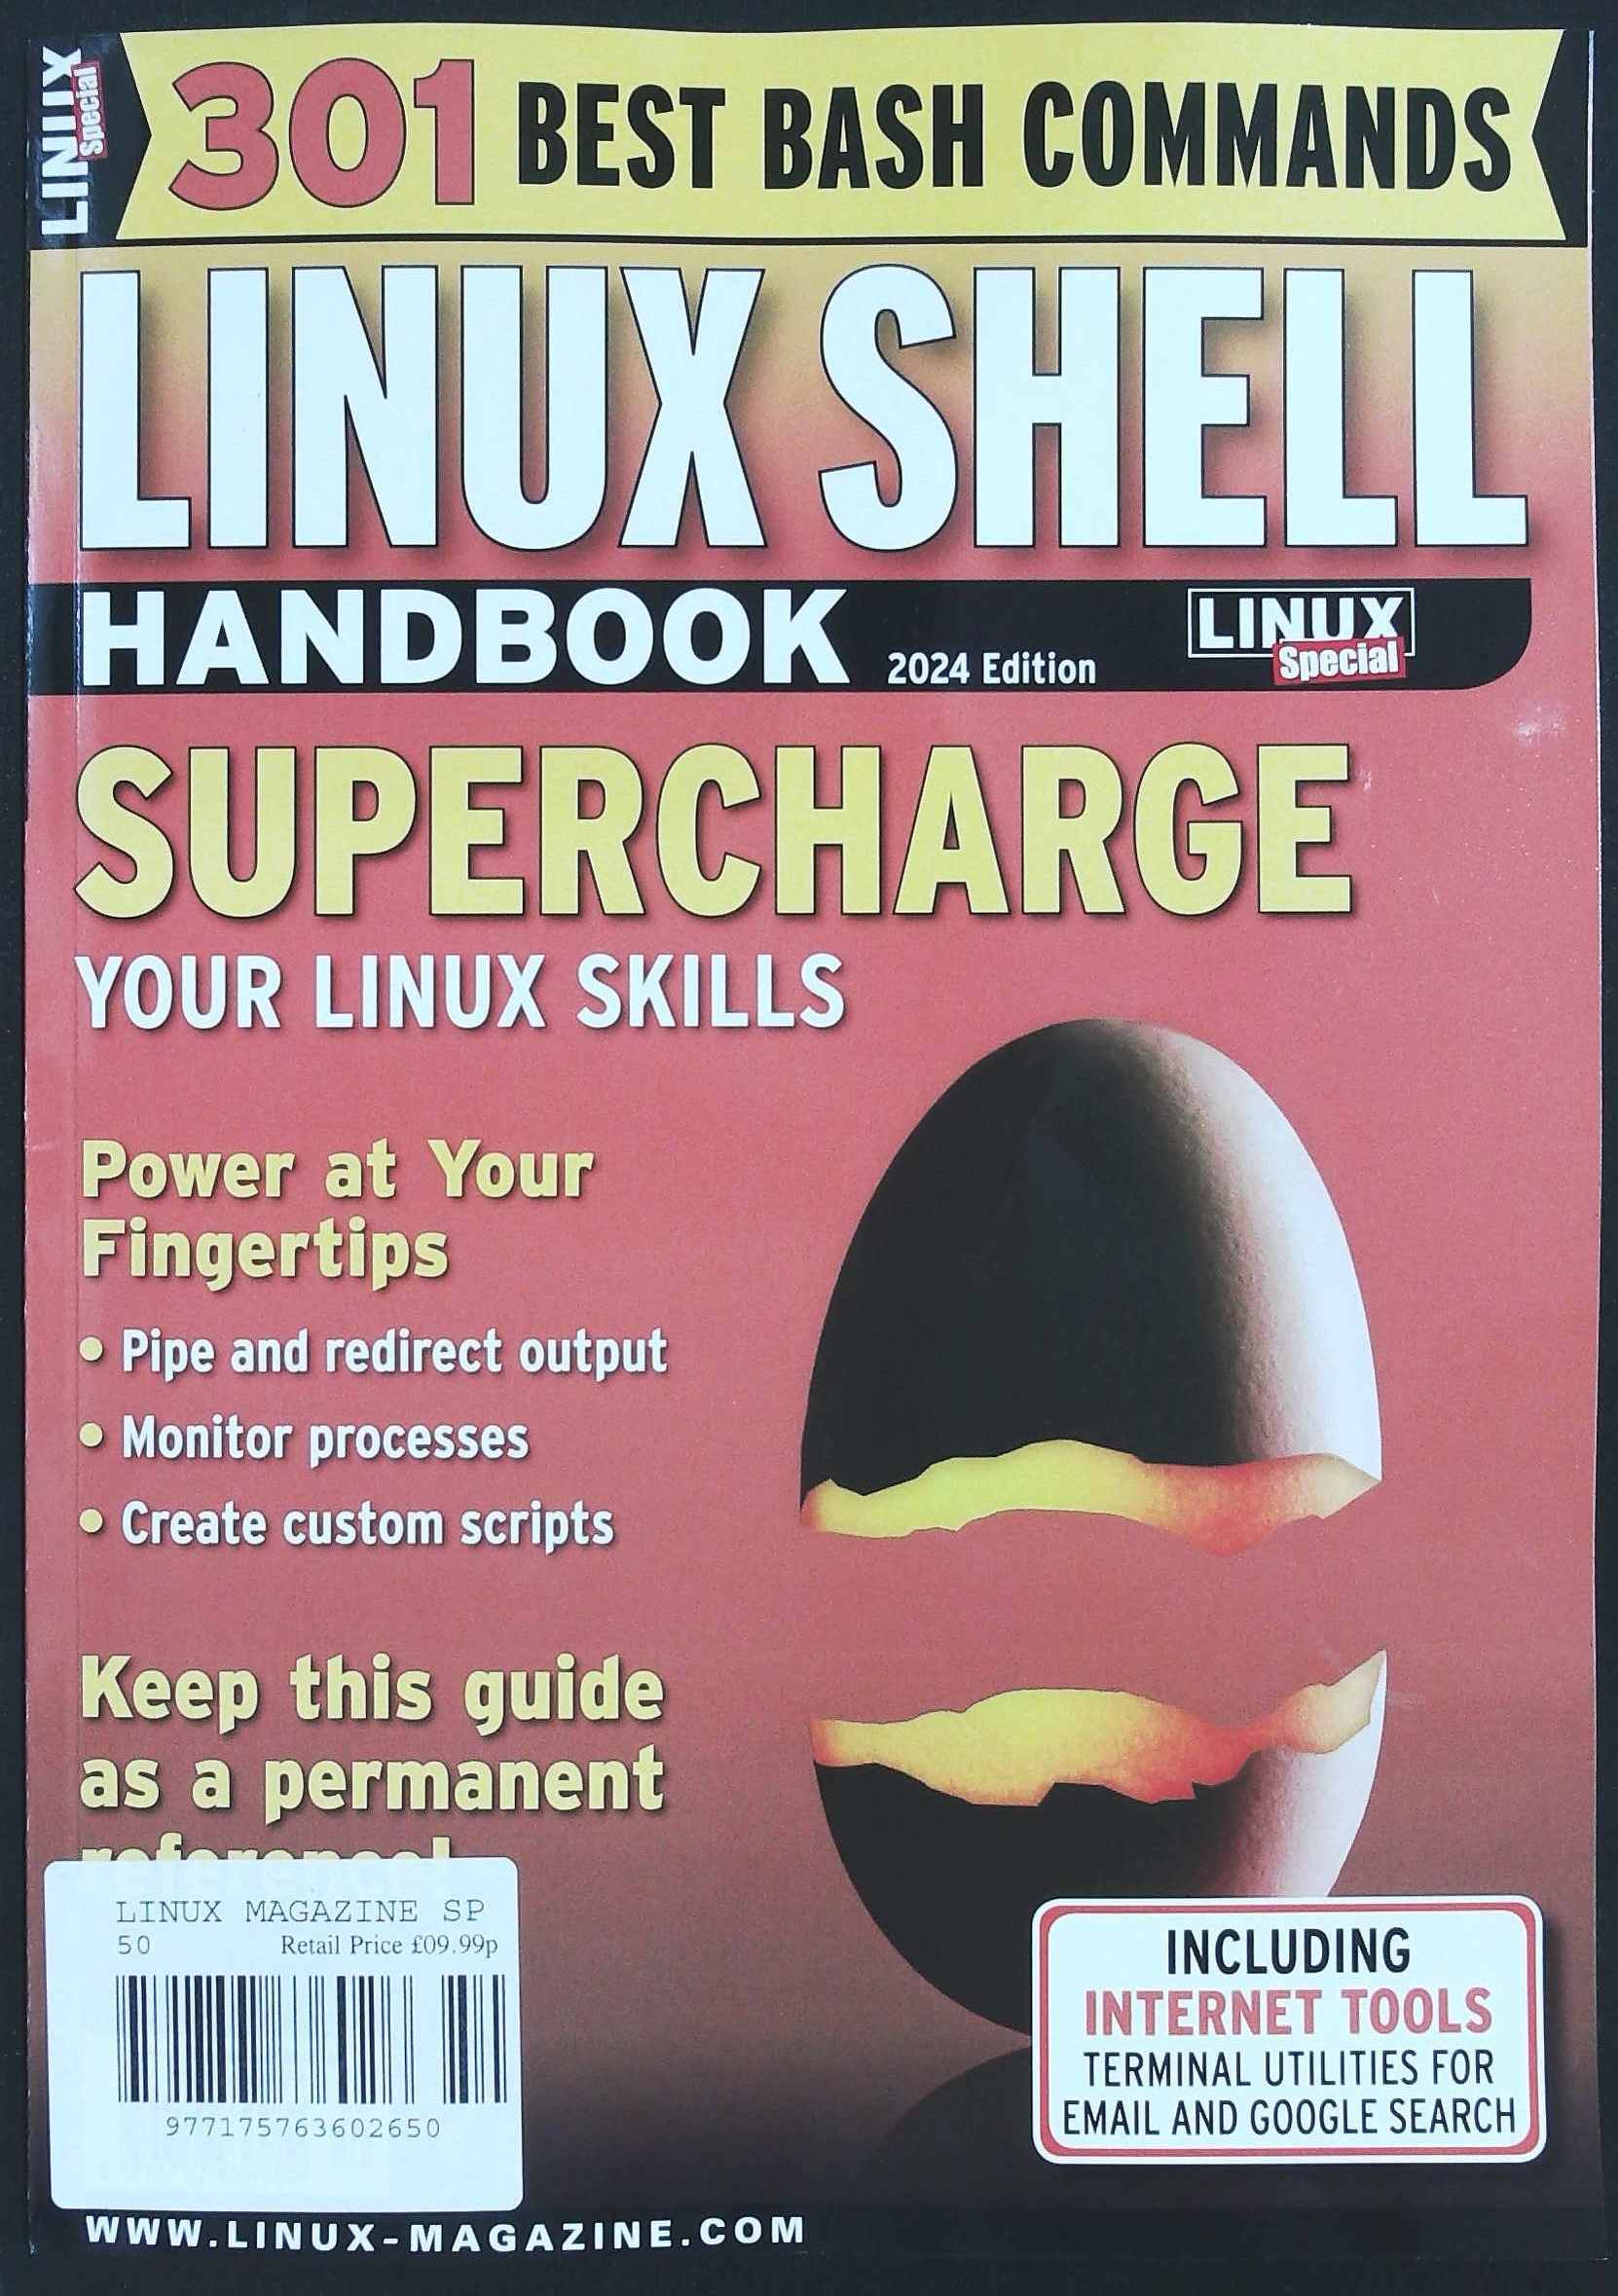 LINUX MAG SPECIAL